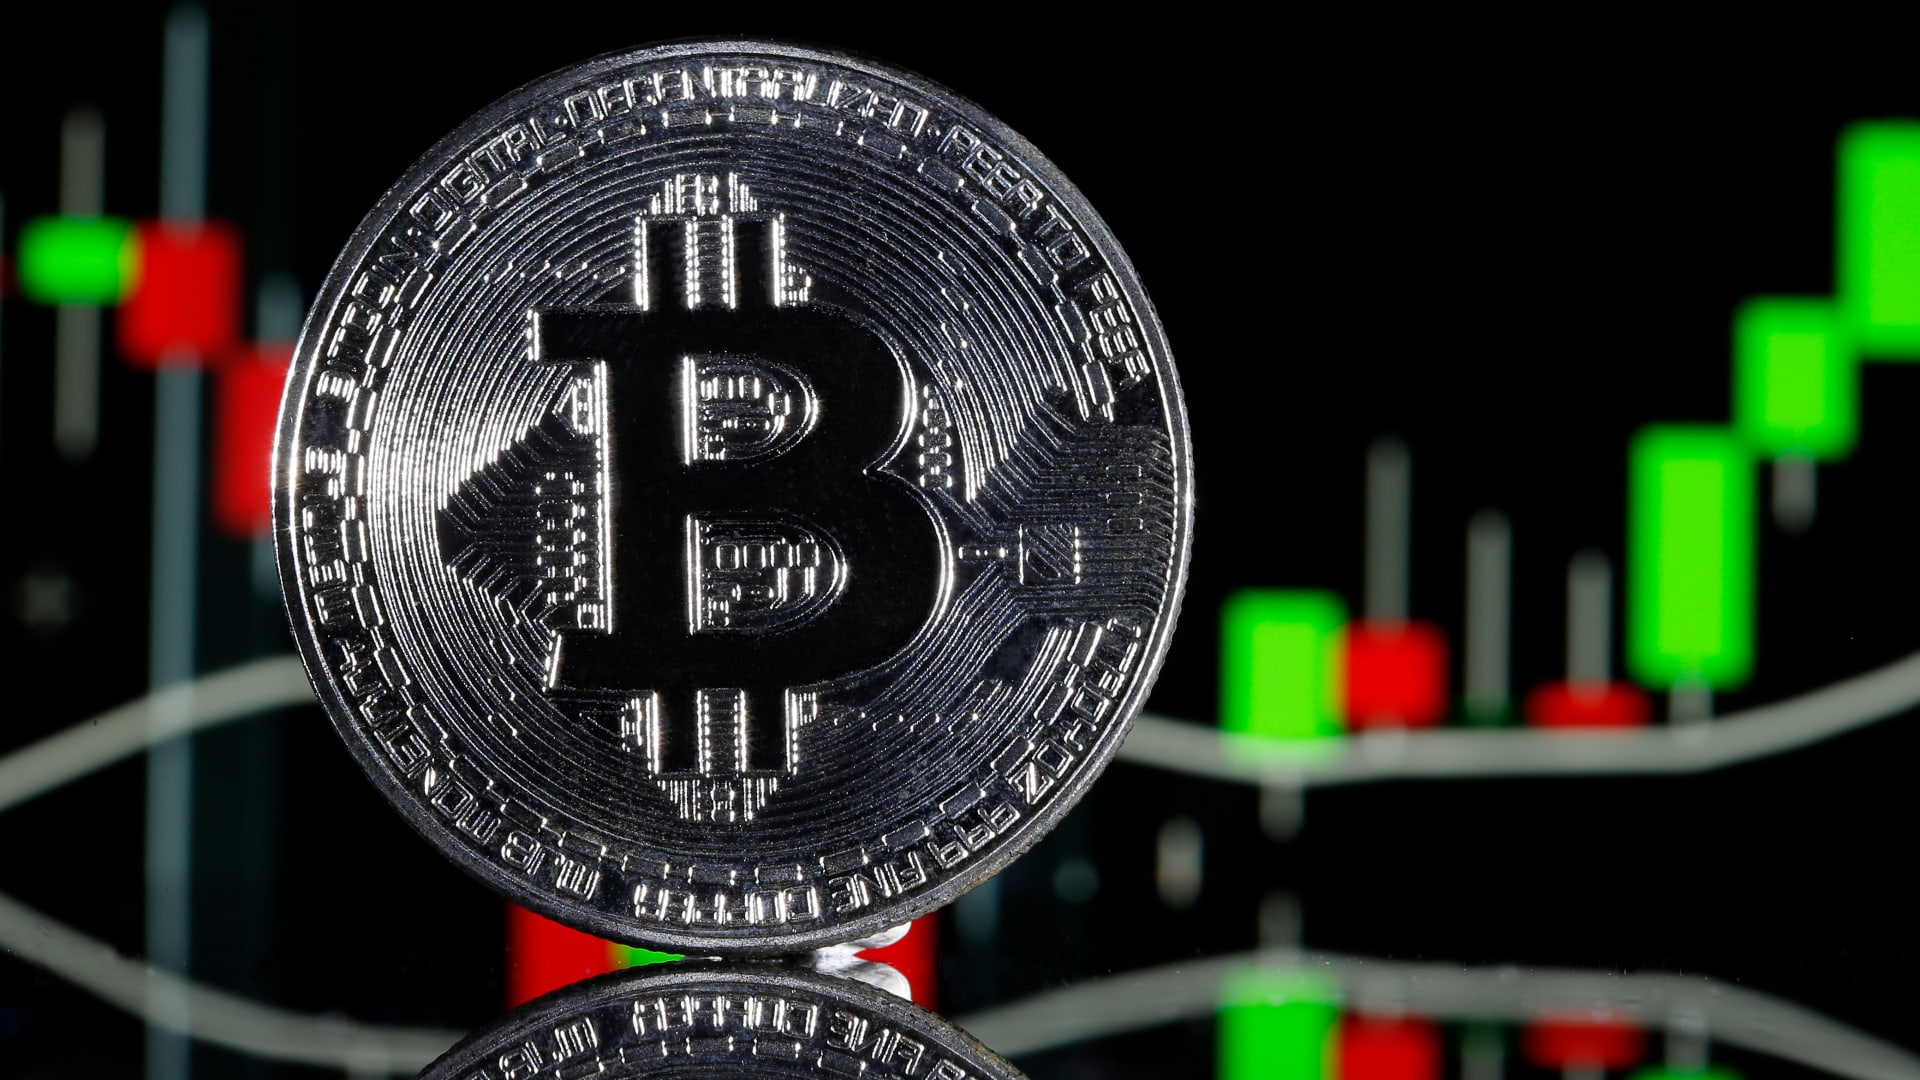 Bitcoin hovered around $66,000 on May 16 after U.S. macroeconomic data triggered a surge in risk assets. Data from Cointelegraph Markets Pro and TradingView tracked Bitcoin’s price movement as bulls tried to solidify a 7.5% gain from the previous day. This rise followed the April Consumer Price Index (CPI) report, which slightly exceeded expectations and sparked hopes for looser financial conditions for crypto and other risk assets. However, some reactions were cautious. Market analysts pointed to a rapid increase in open interest as a potential sign that Bitcoin’s price movement might not be sustainable. Popular trader Credible Crypto commented on